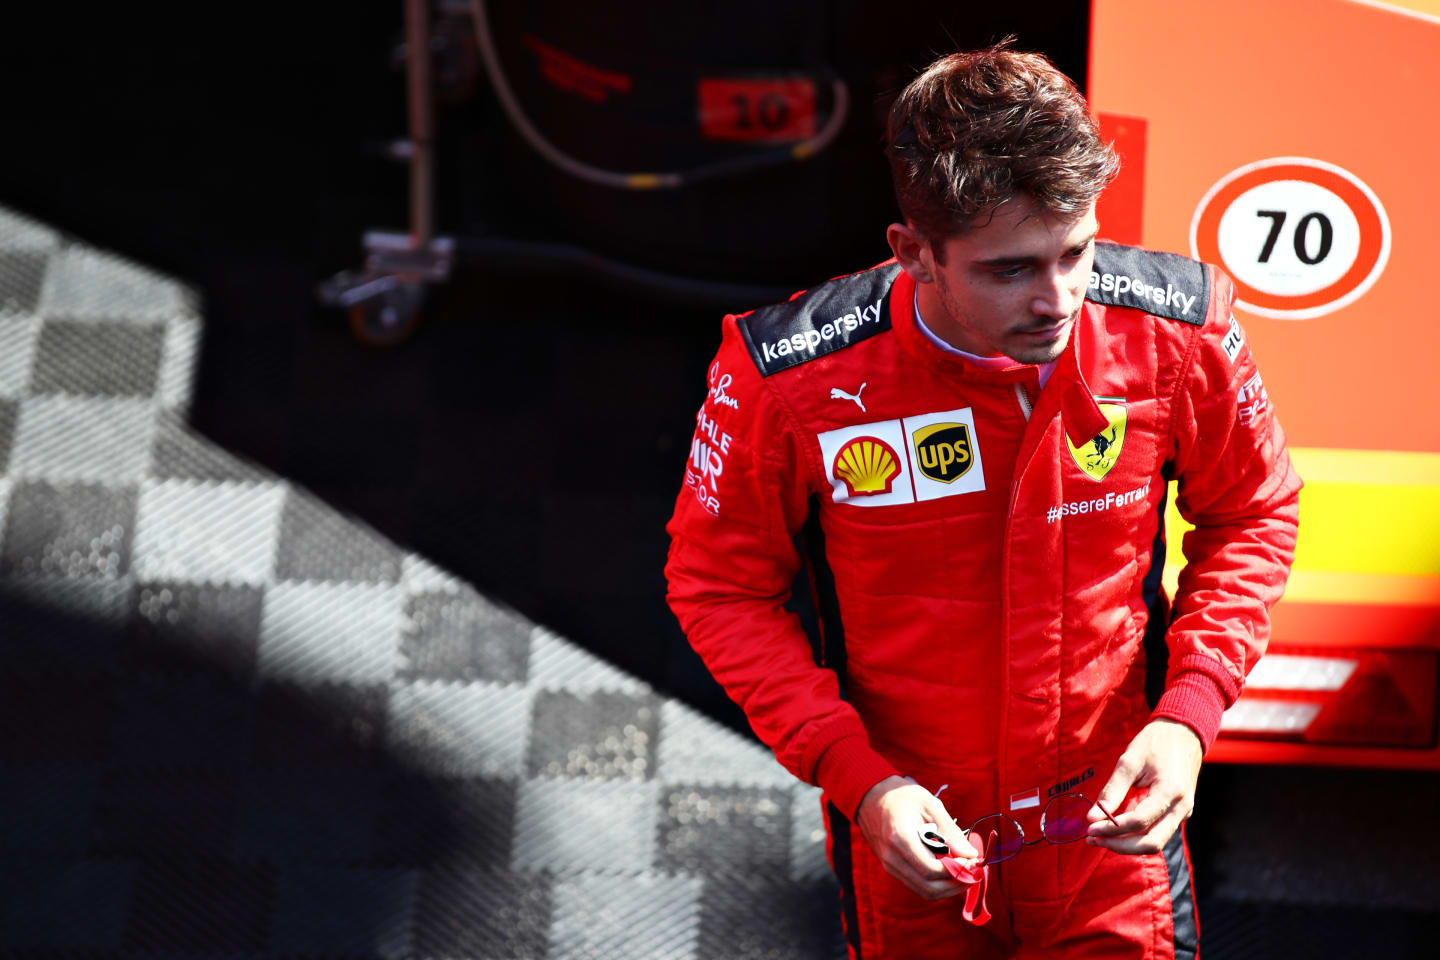 MONZA, ITALY - SEPTEMBER 03: Charles Leclerc of Monaco and Ferrari looks on in the Paddock during